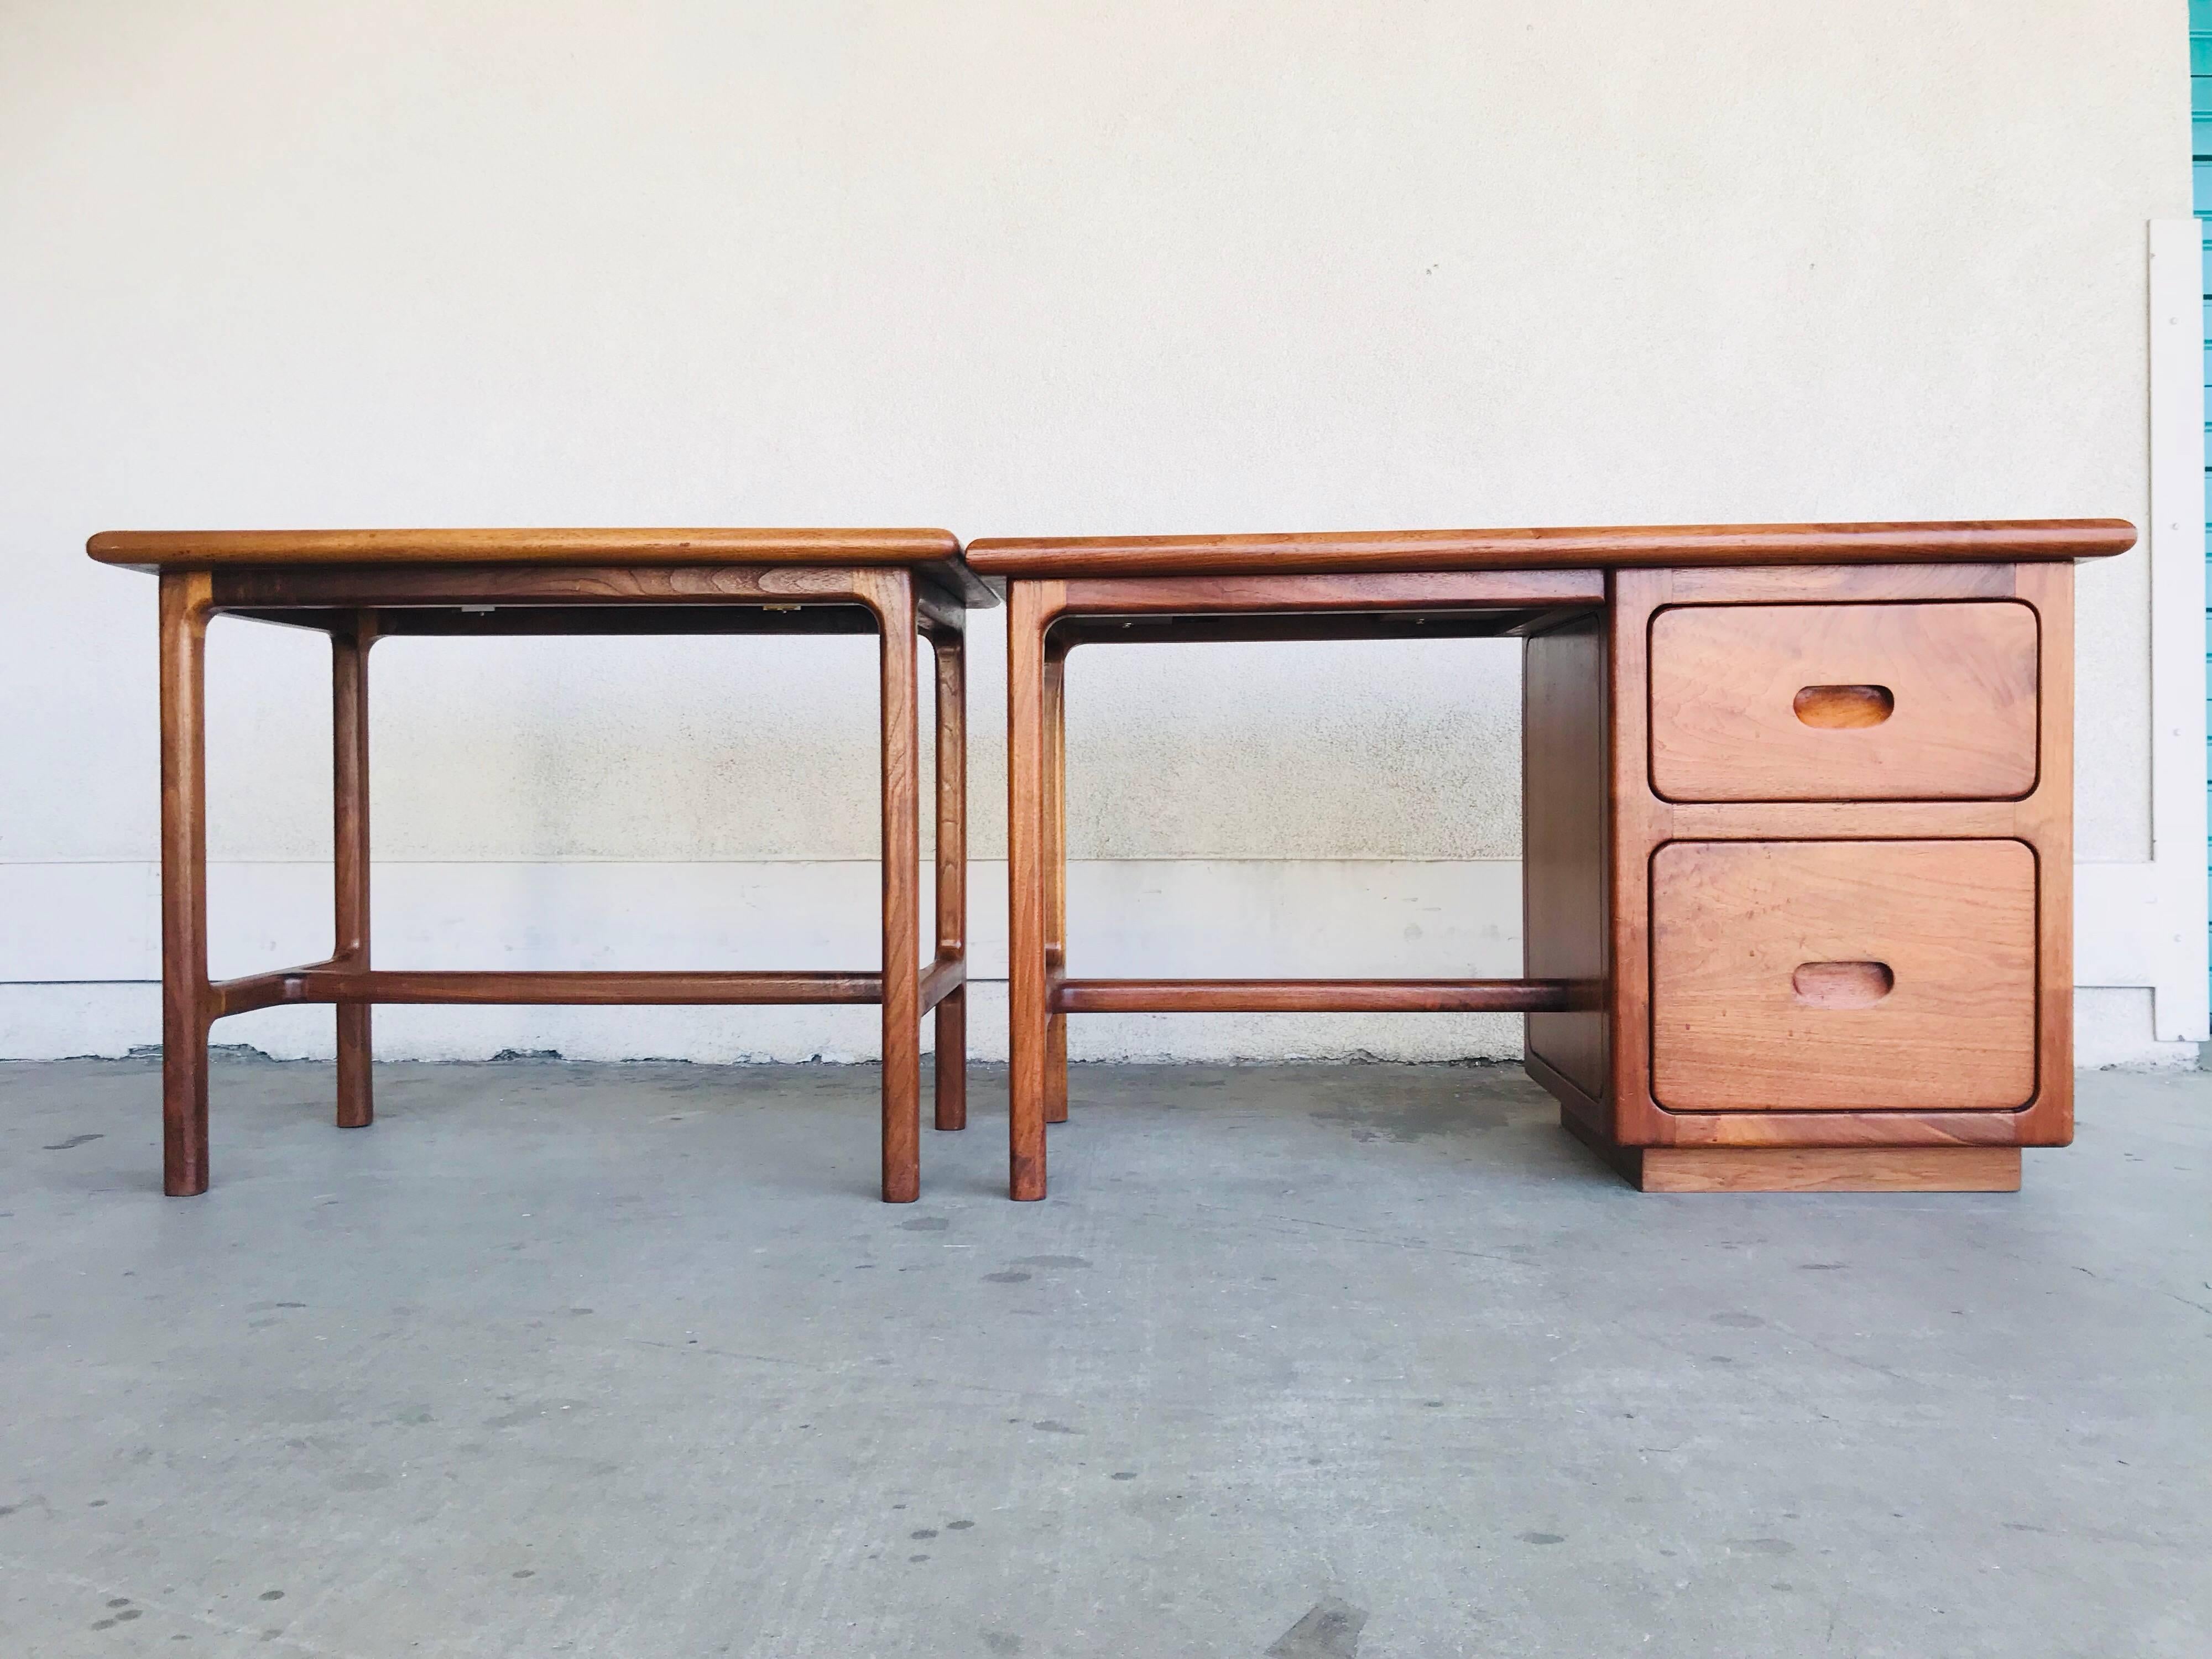 A nice California design set.
Made of solid shedua wood (African walnut).
It's in the original condition with minute ware and patina.
The table is 35